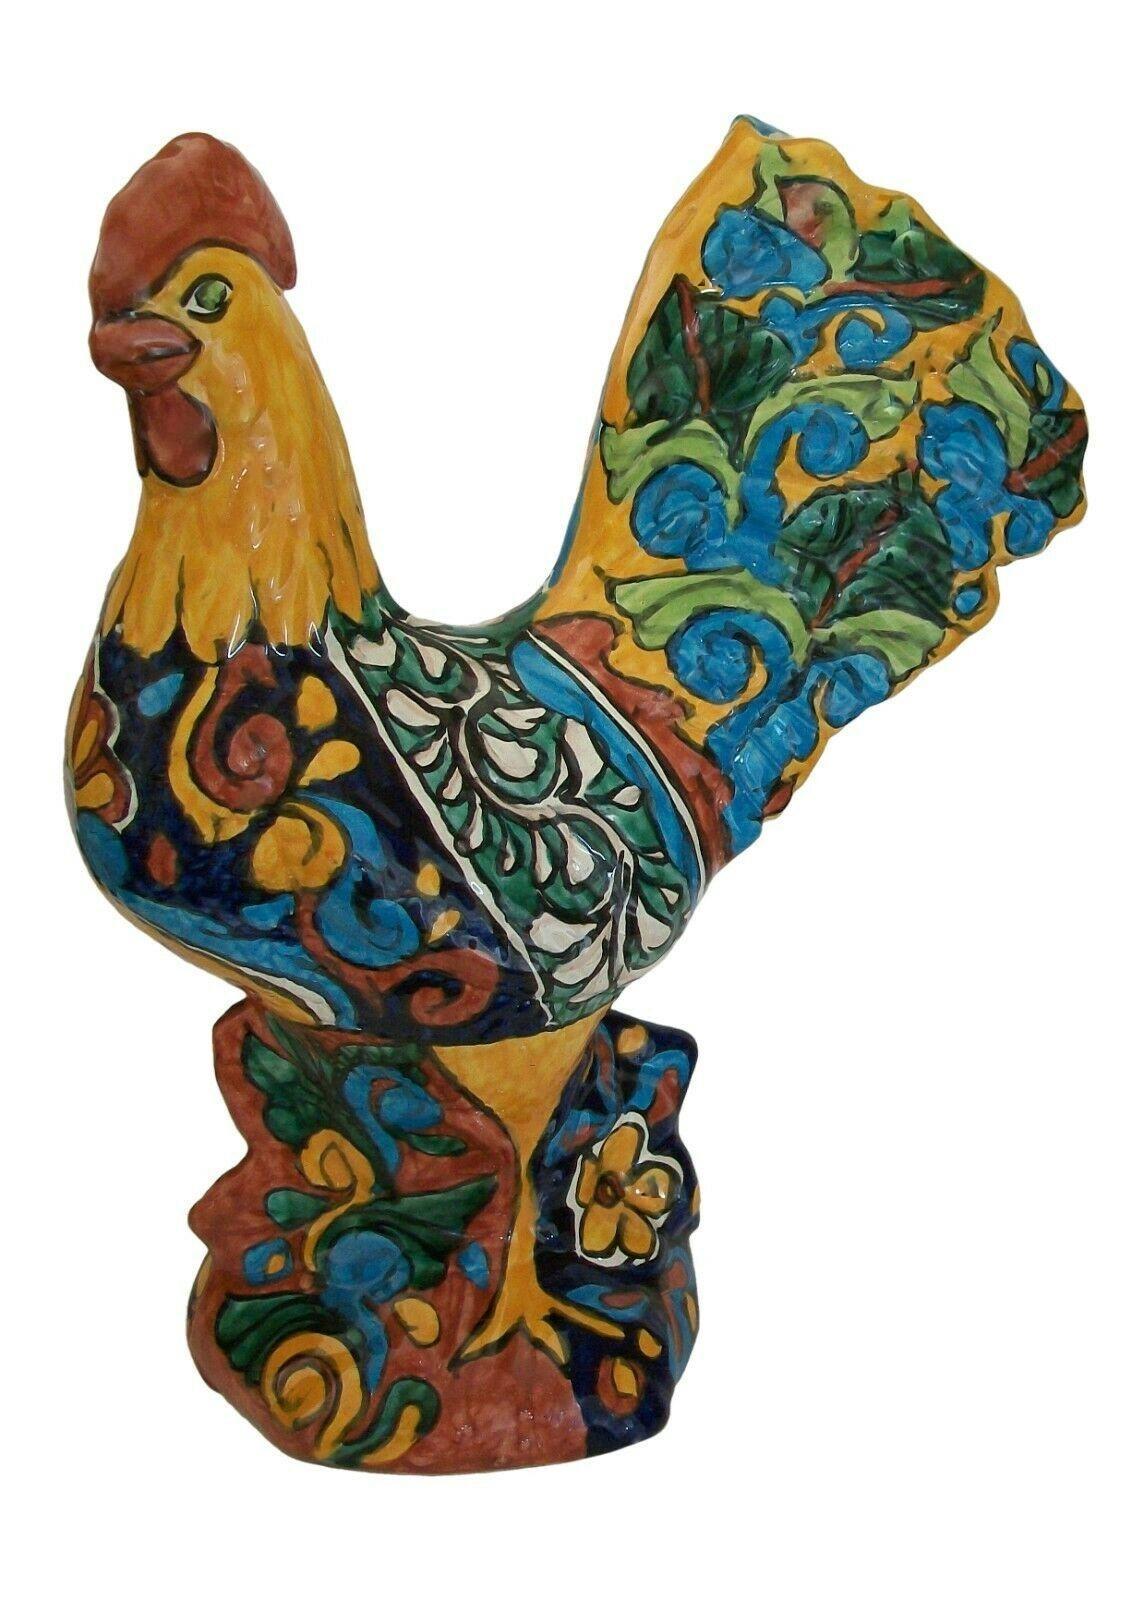 Large vintage Talavera hand painted studio ceramic Rooster - featuring a typical brightly colored multi pattern design - unsigned - Mexico - circa 1980's.

Excellent/mint vintage condition - no loss - no damage - no restoration - minor signs of